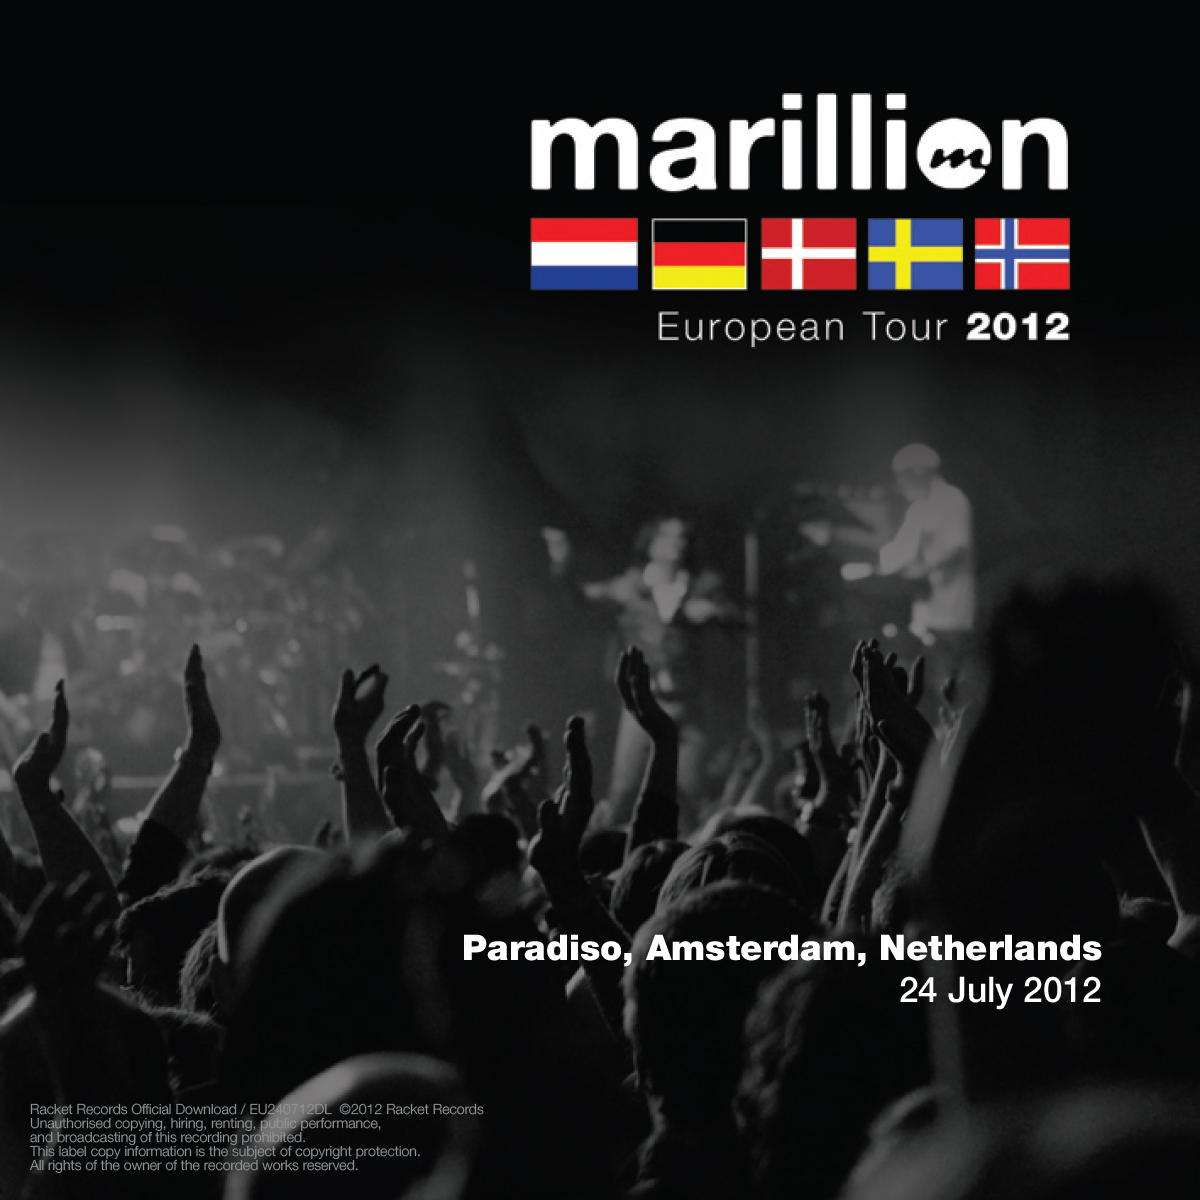 Paradiso, Amsterdam, NL<br>24th July 2012 Live Download 320kbps